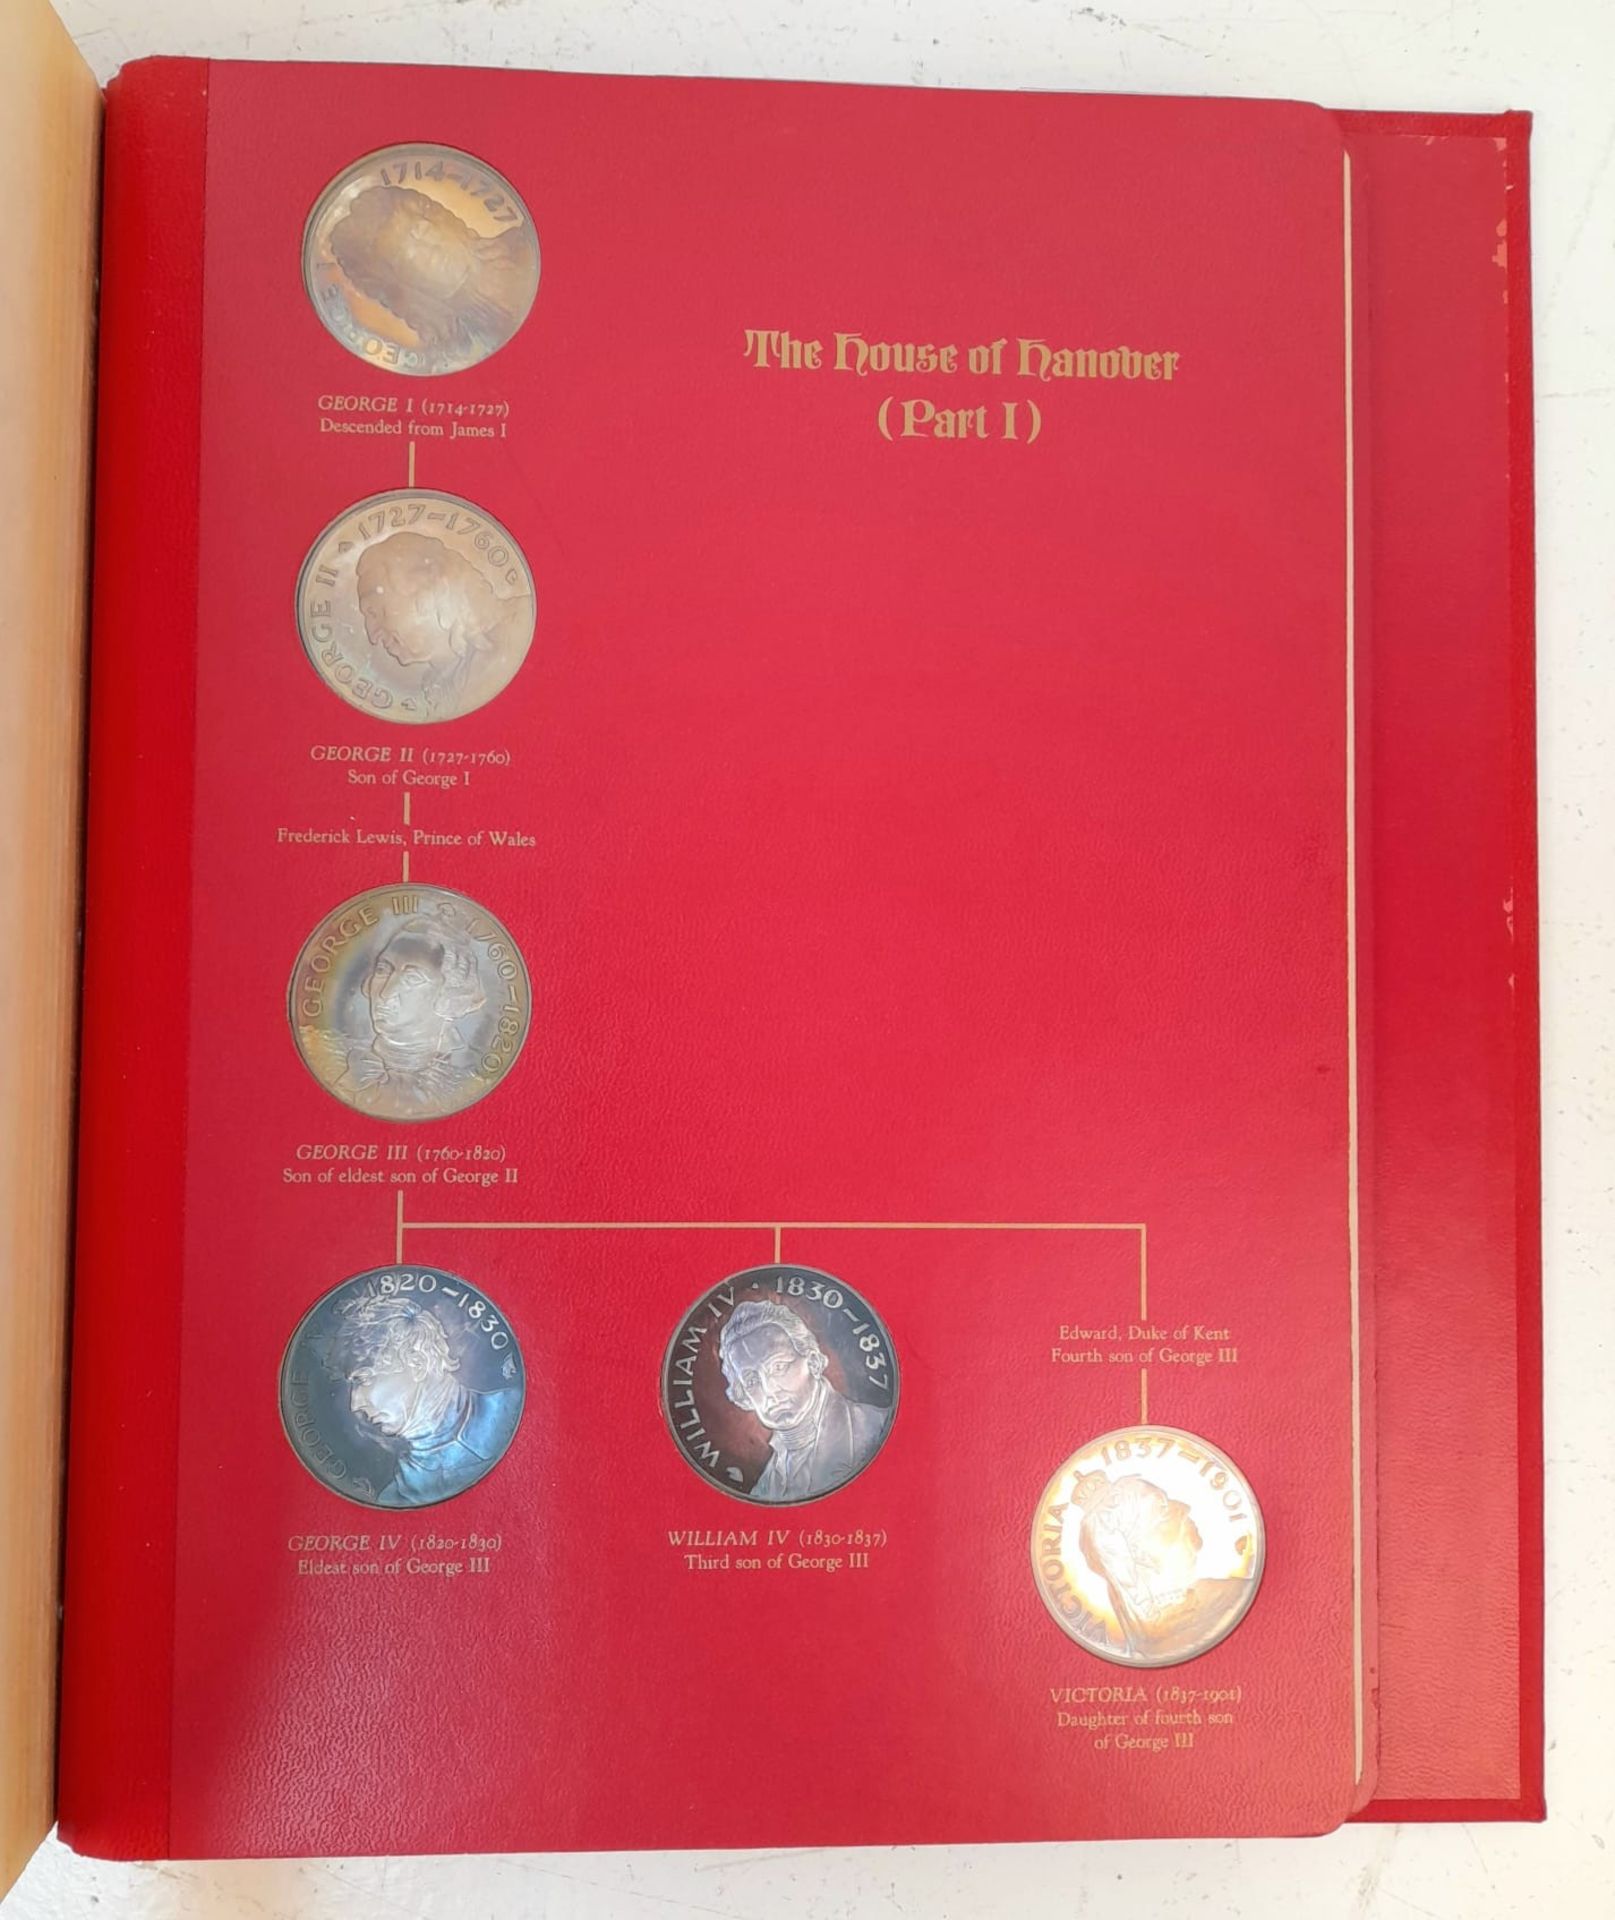 The Kings and Queens of England. First edition sterling silver proof medal set. 43 monarchs in - Image 6 of 8